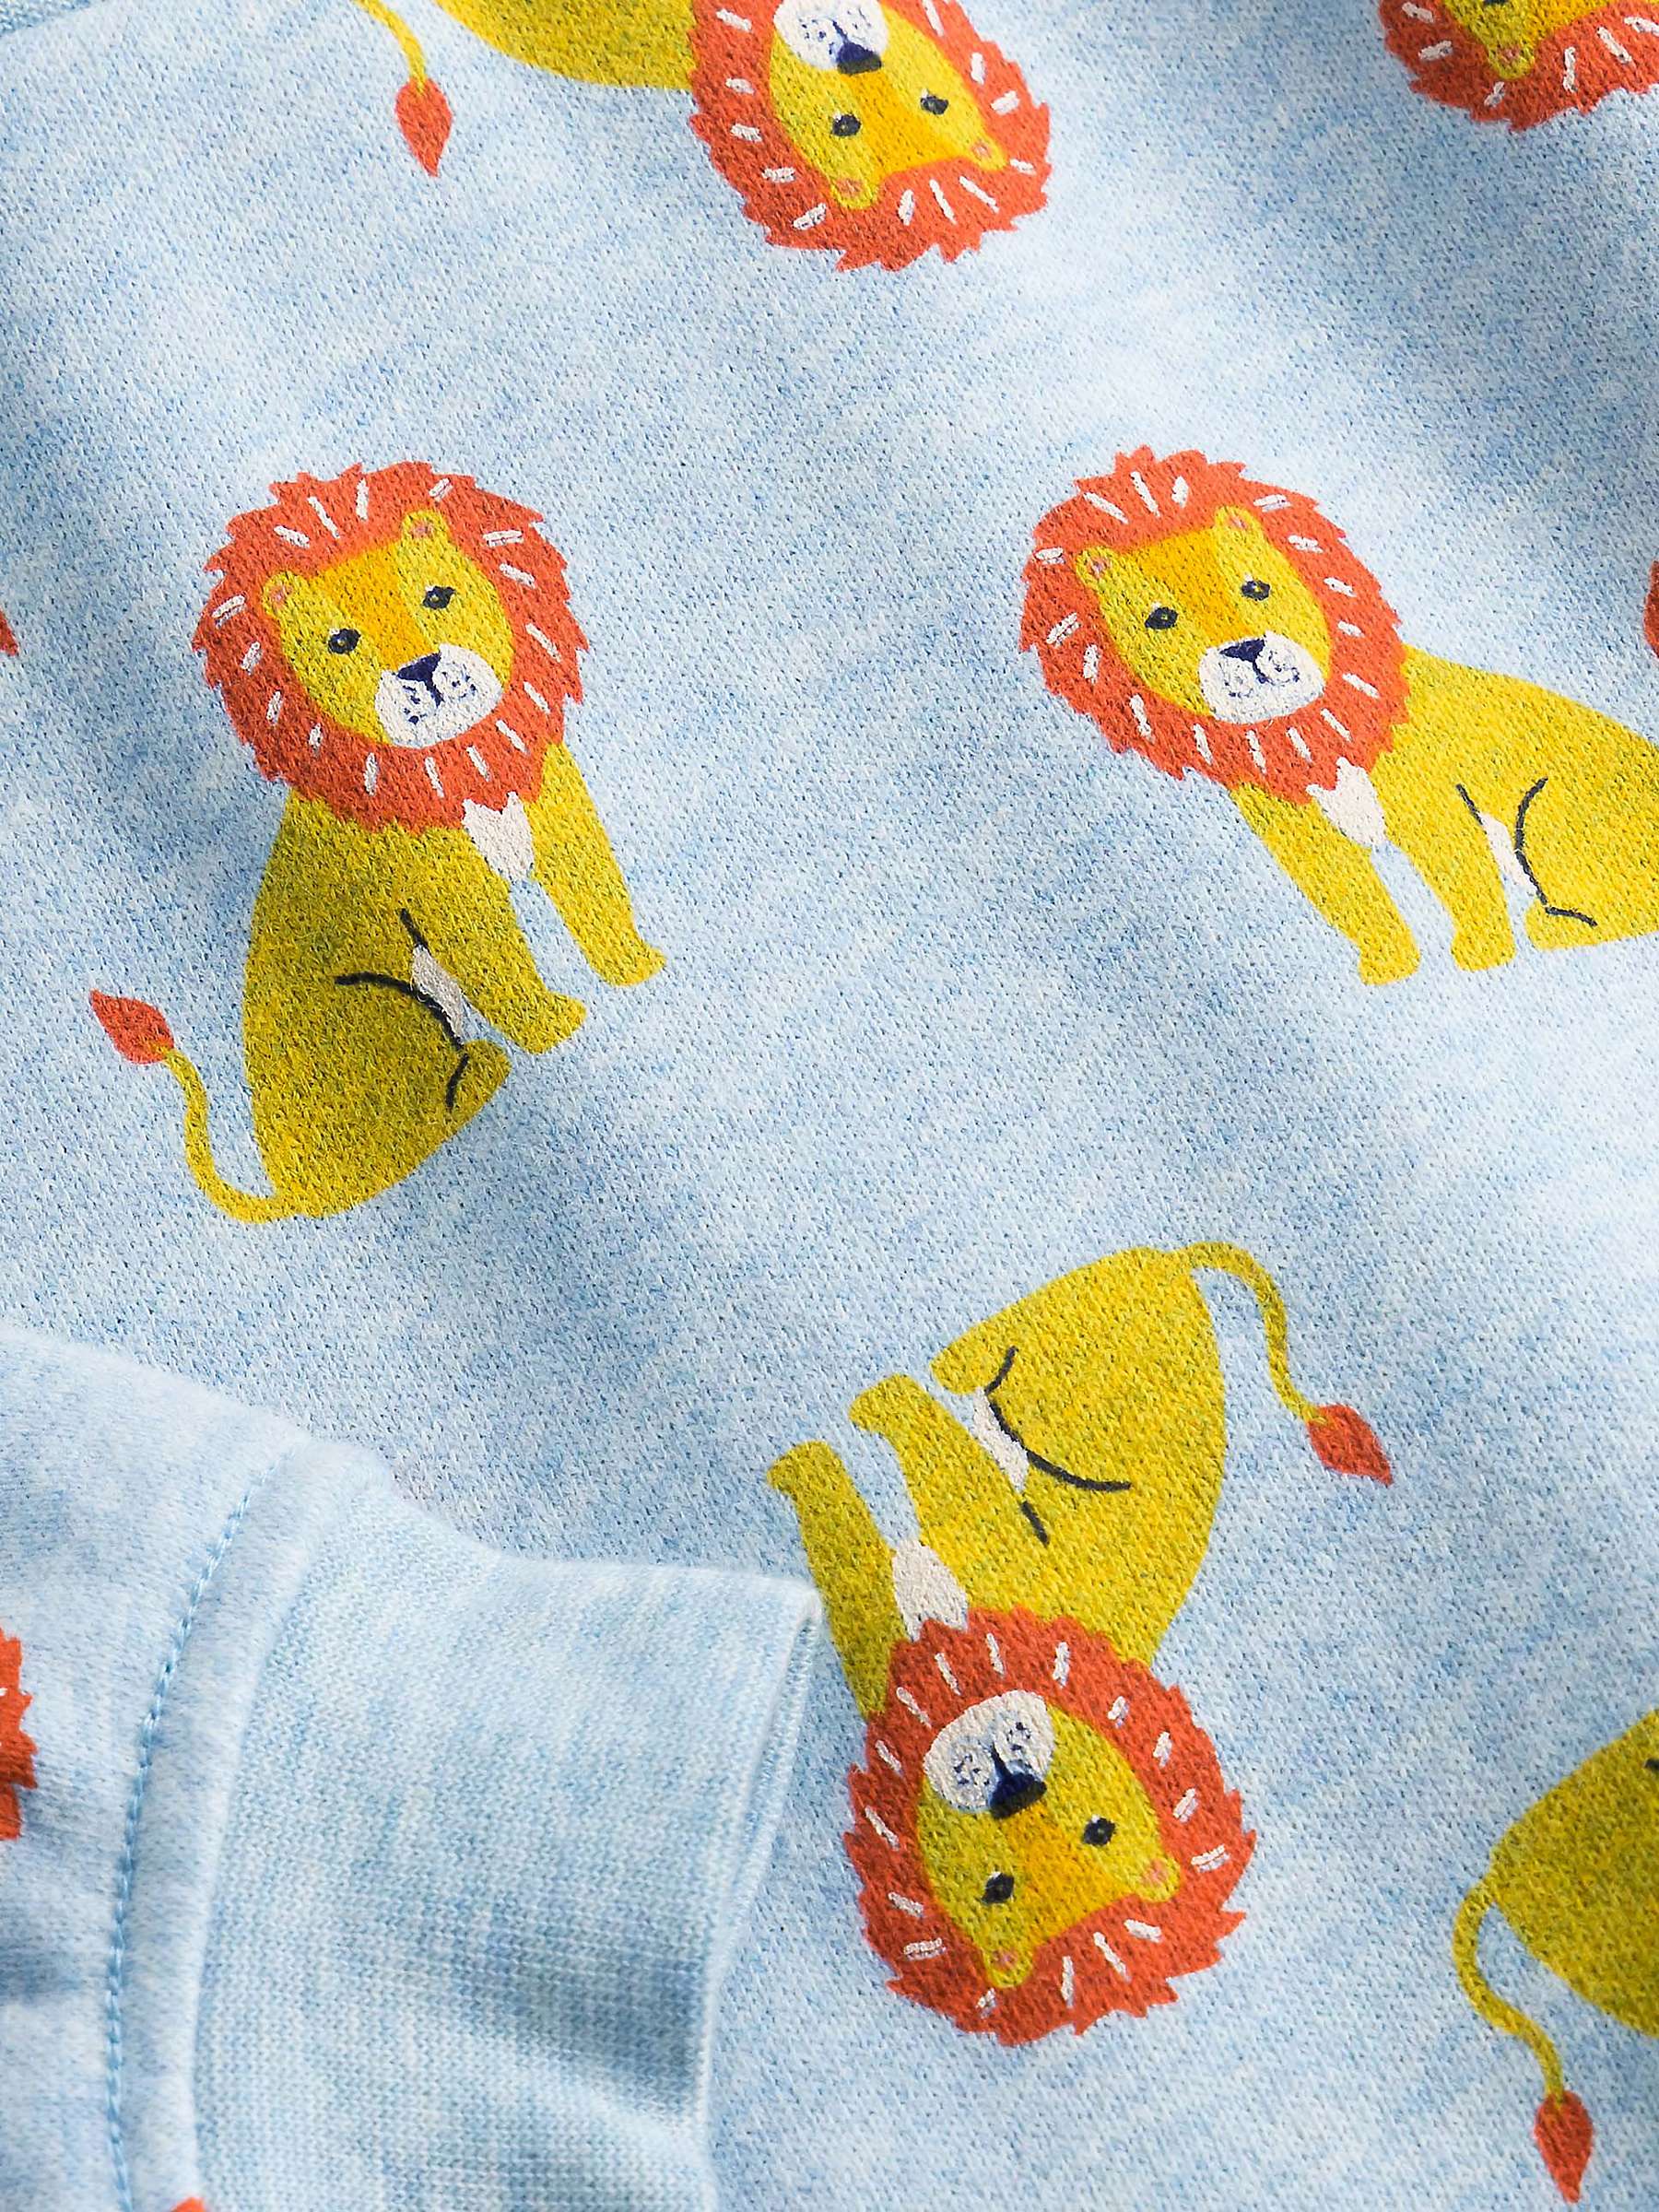 Buy Mini Boden Baby Baby Relaxed Lion Print Sweatshirt, Pebble Blue Online at johnlewis.com